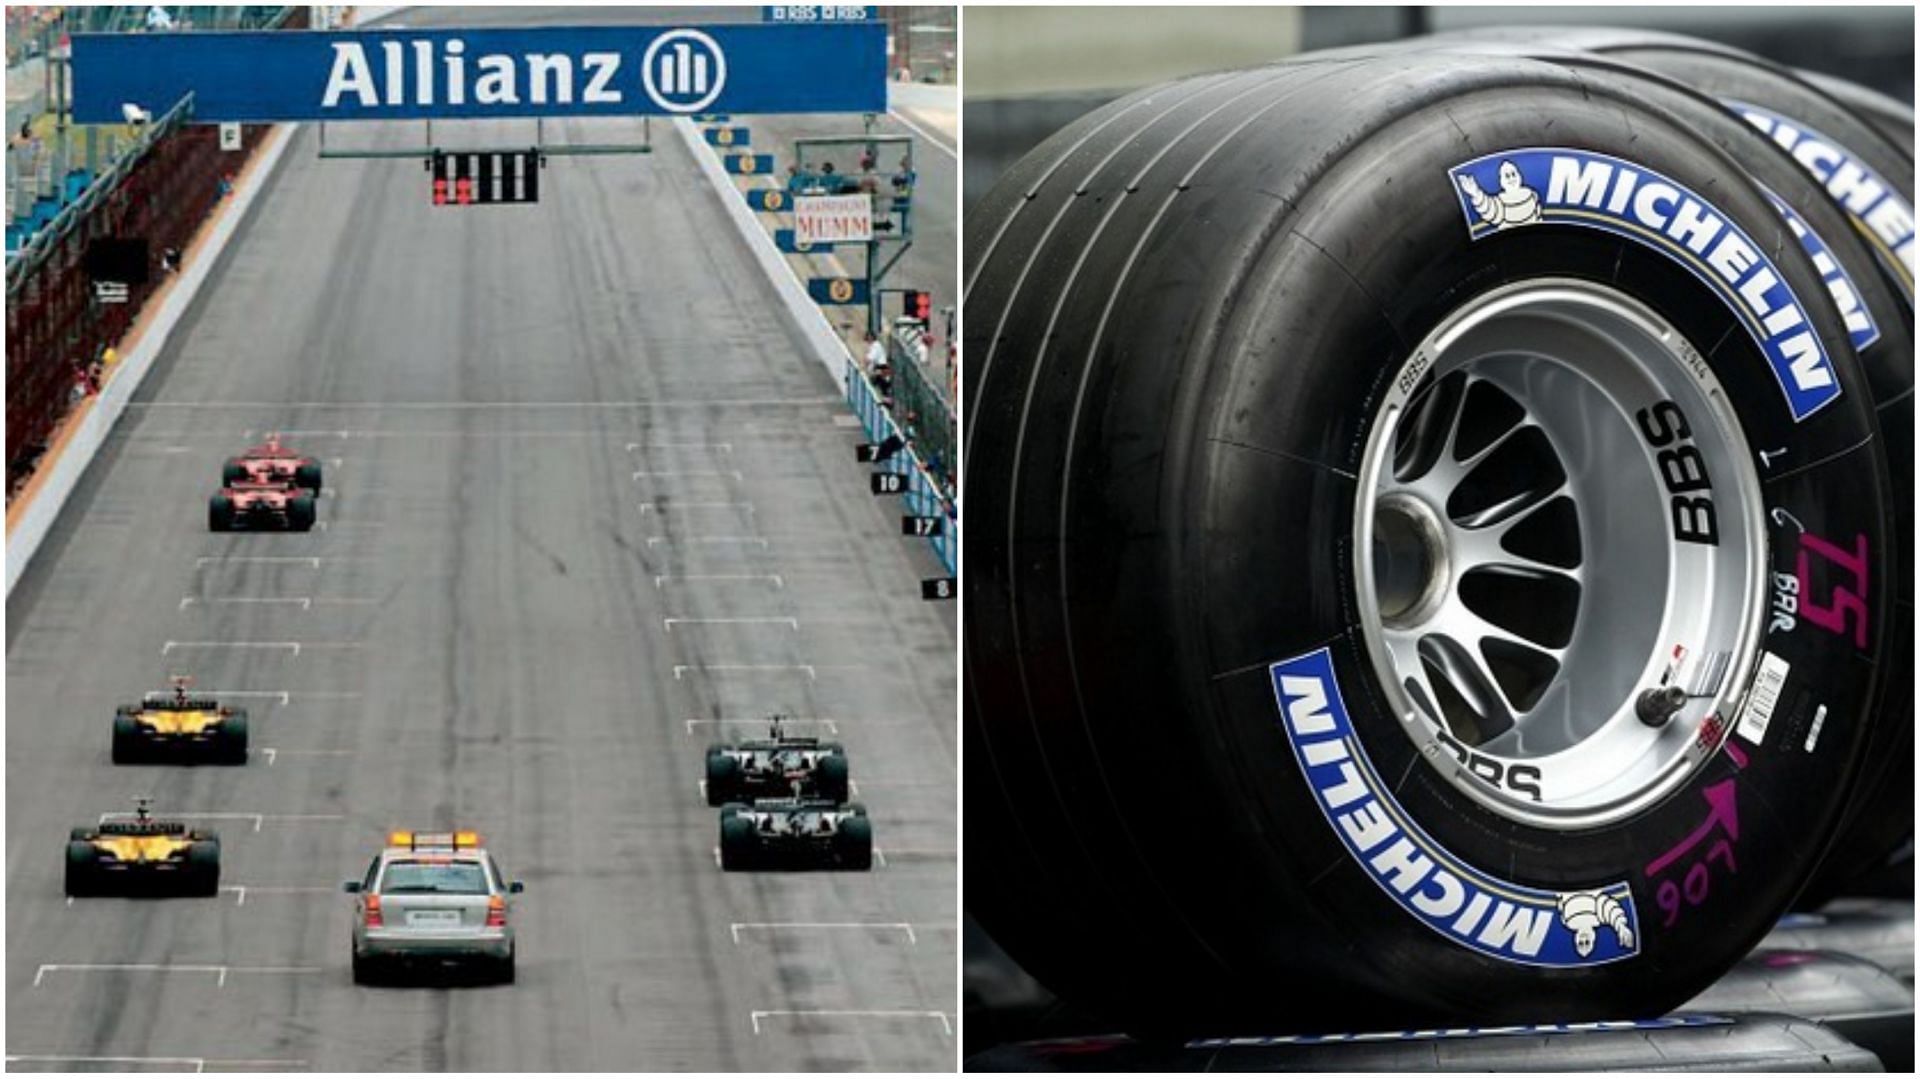 The 2005 F1 Indianapolis Grand Prix remains one of the darkest moments in F1 history till date